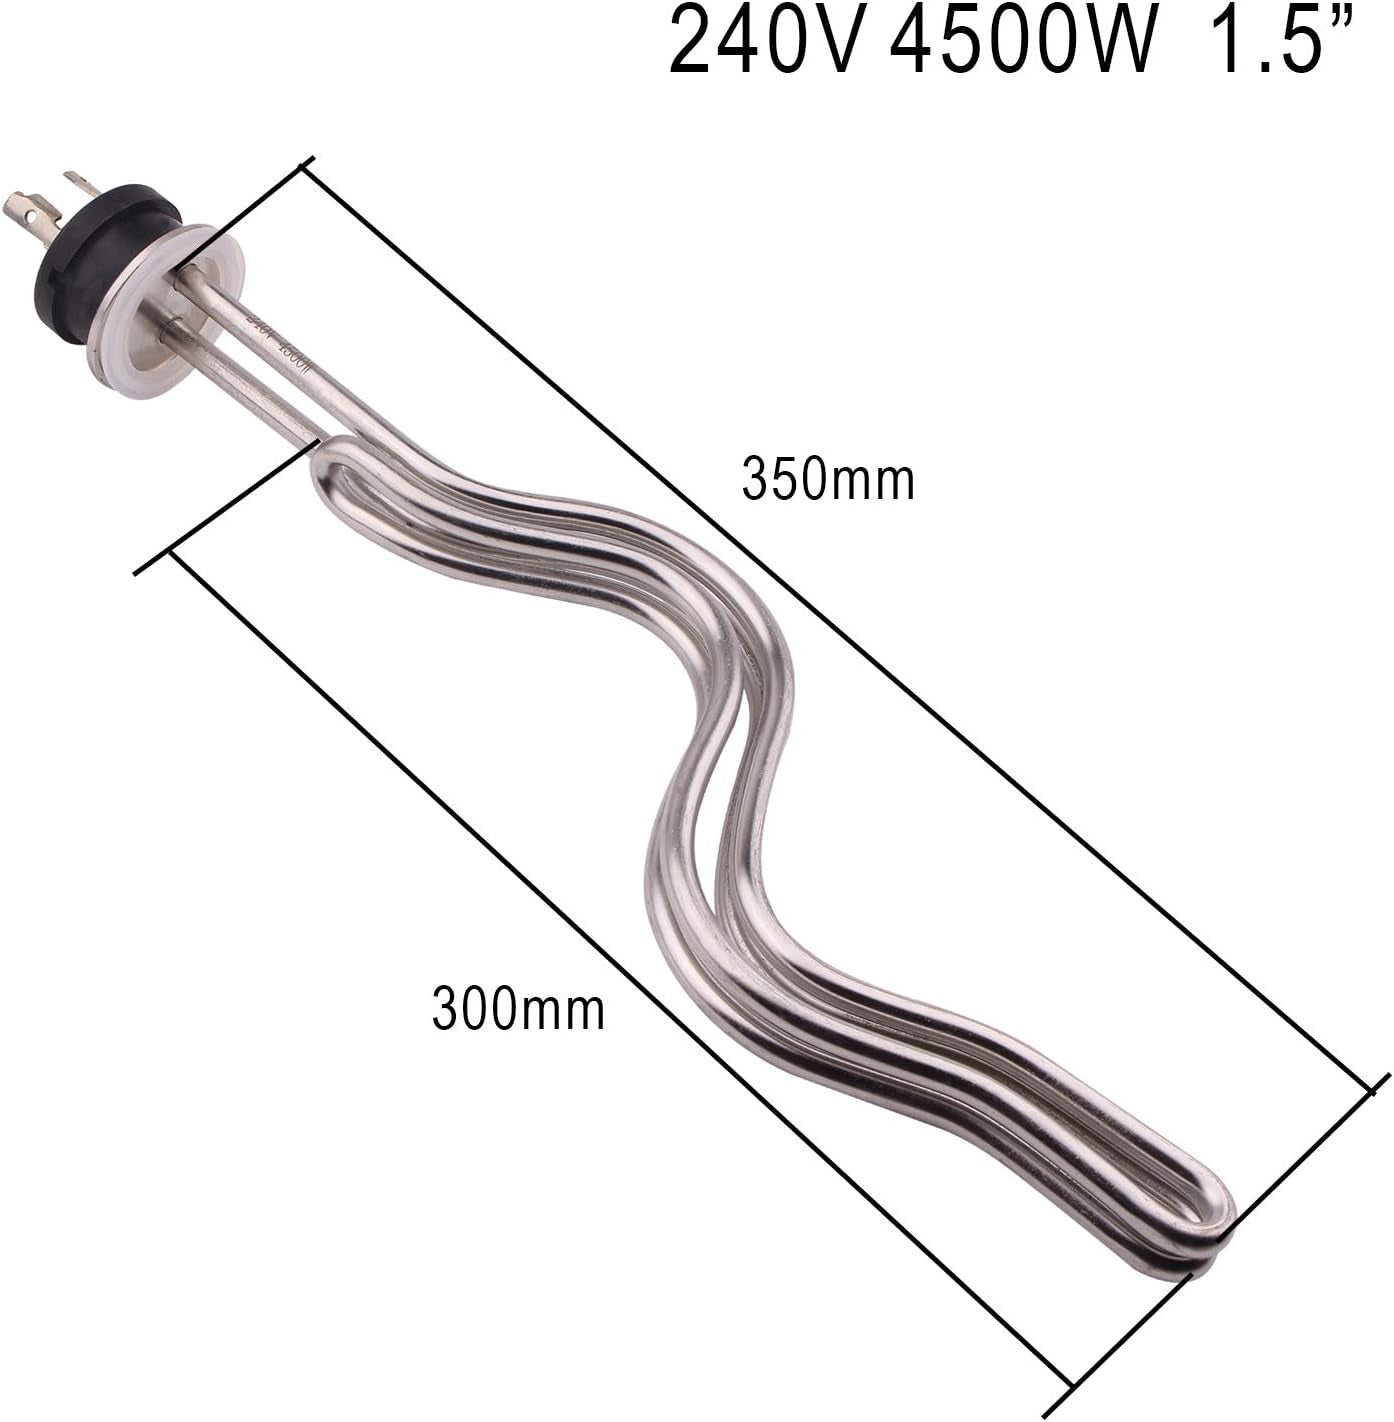 240V 4500W Tri-Clamp Ripple Heating Element Stainless Steel Immersion Water Heater with 3-Wire Electrical Locking Plug (1.5 Inch Tri Clamp)